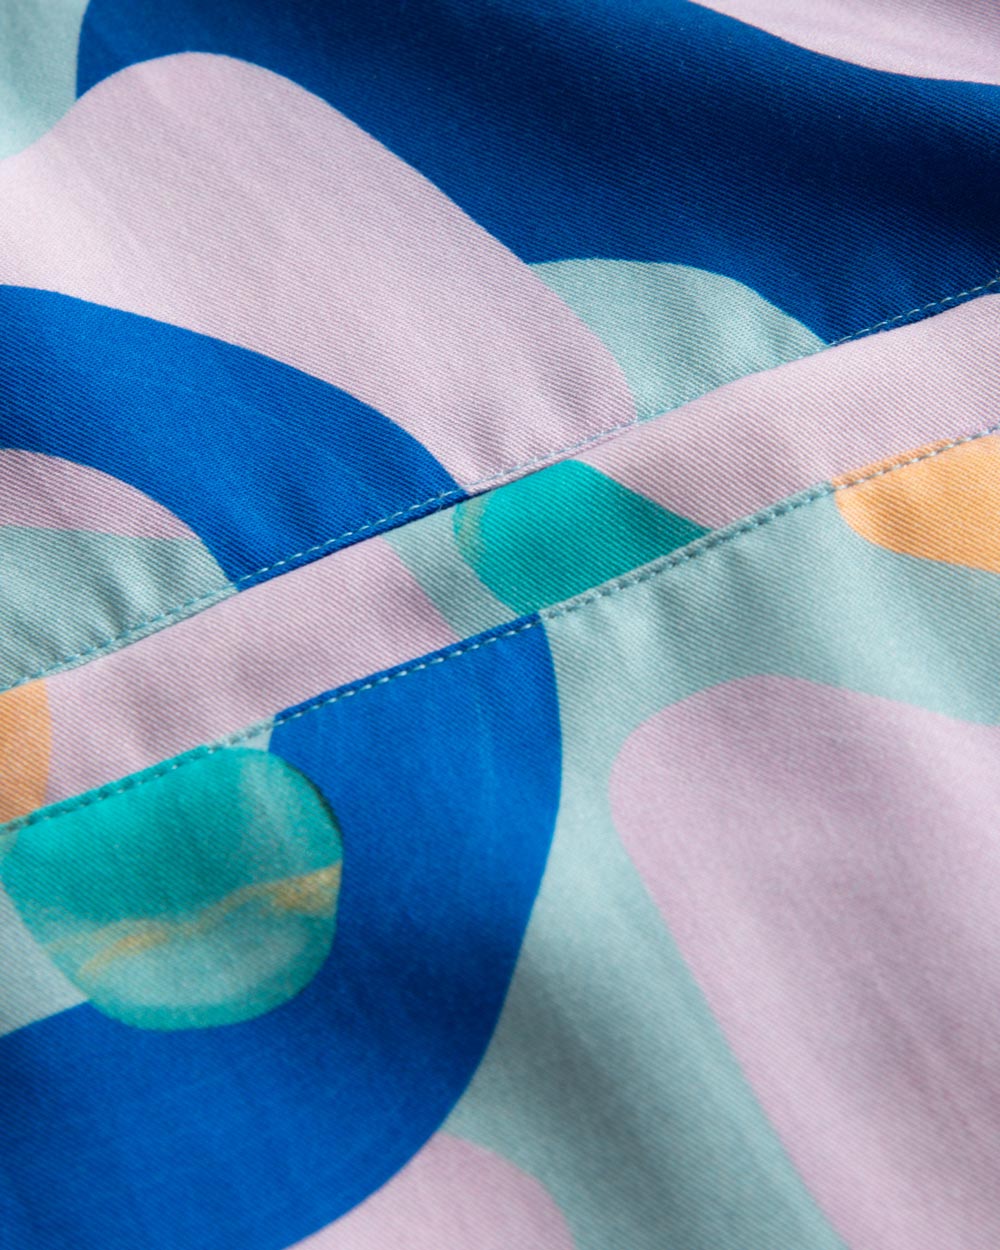 Close up view on breast pocket on a short-sleeved vacation shirt with a multi-colored graphic patter